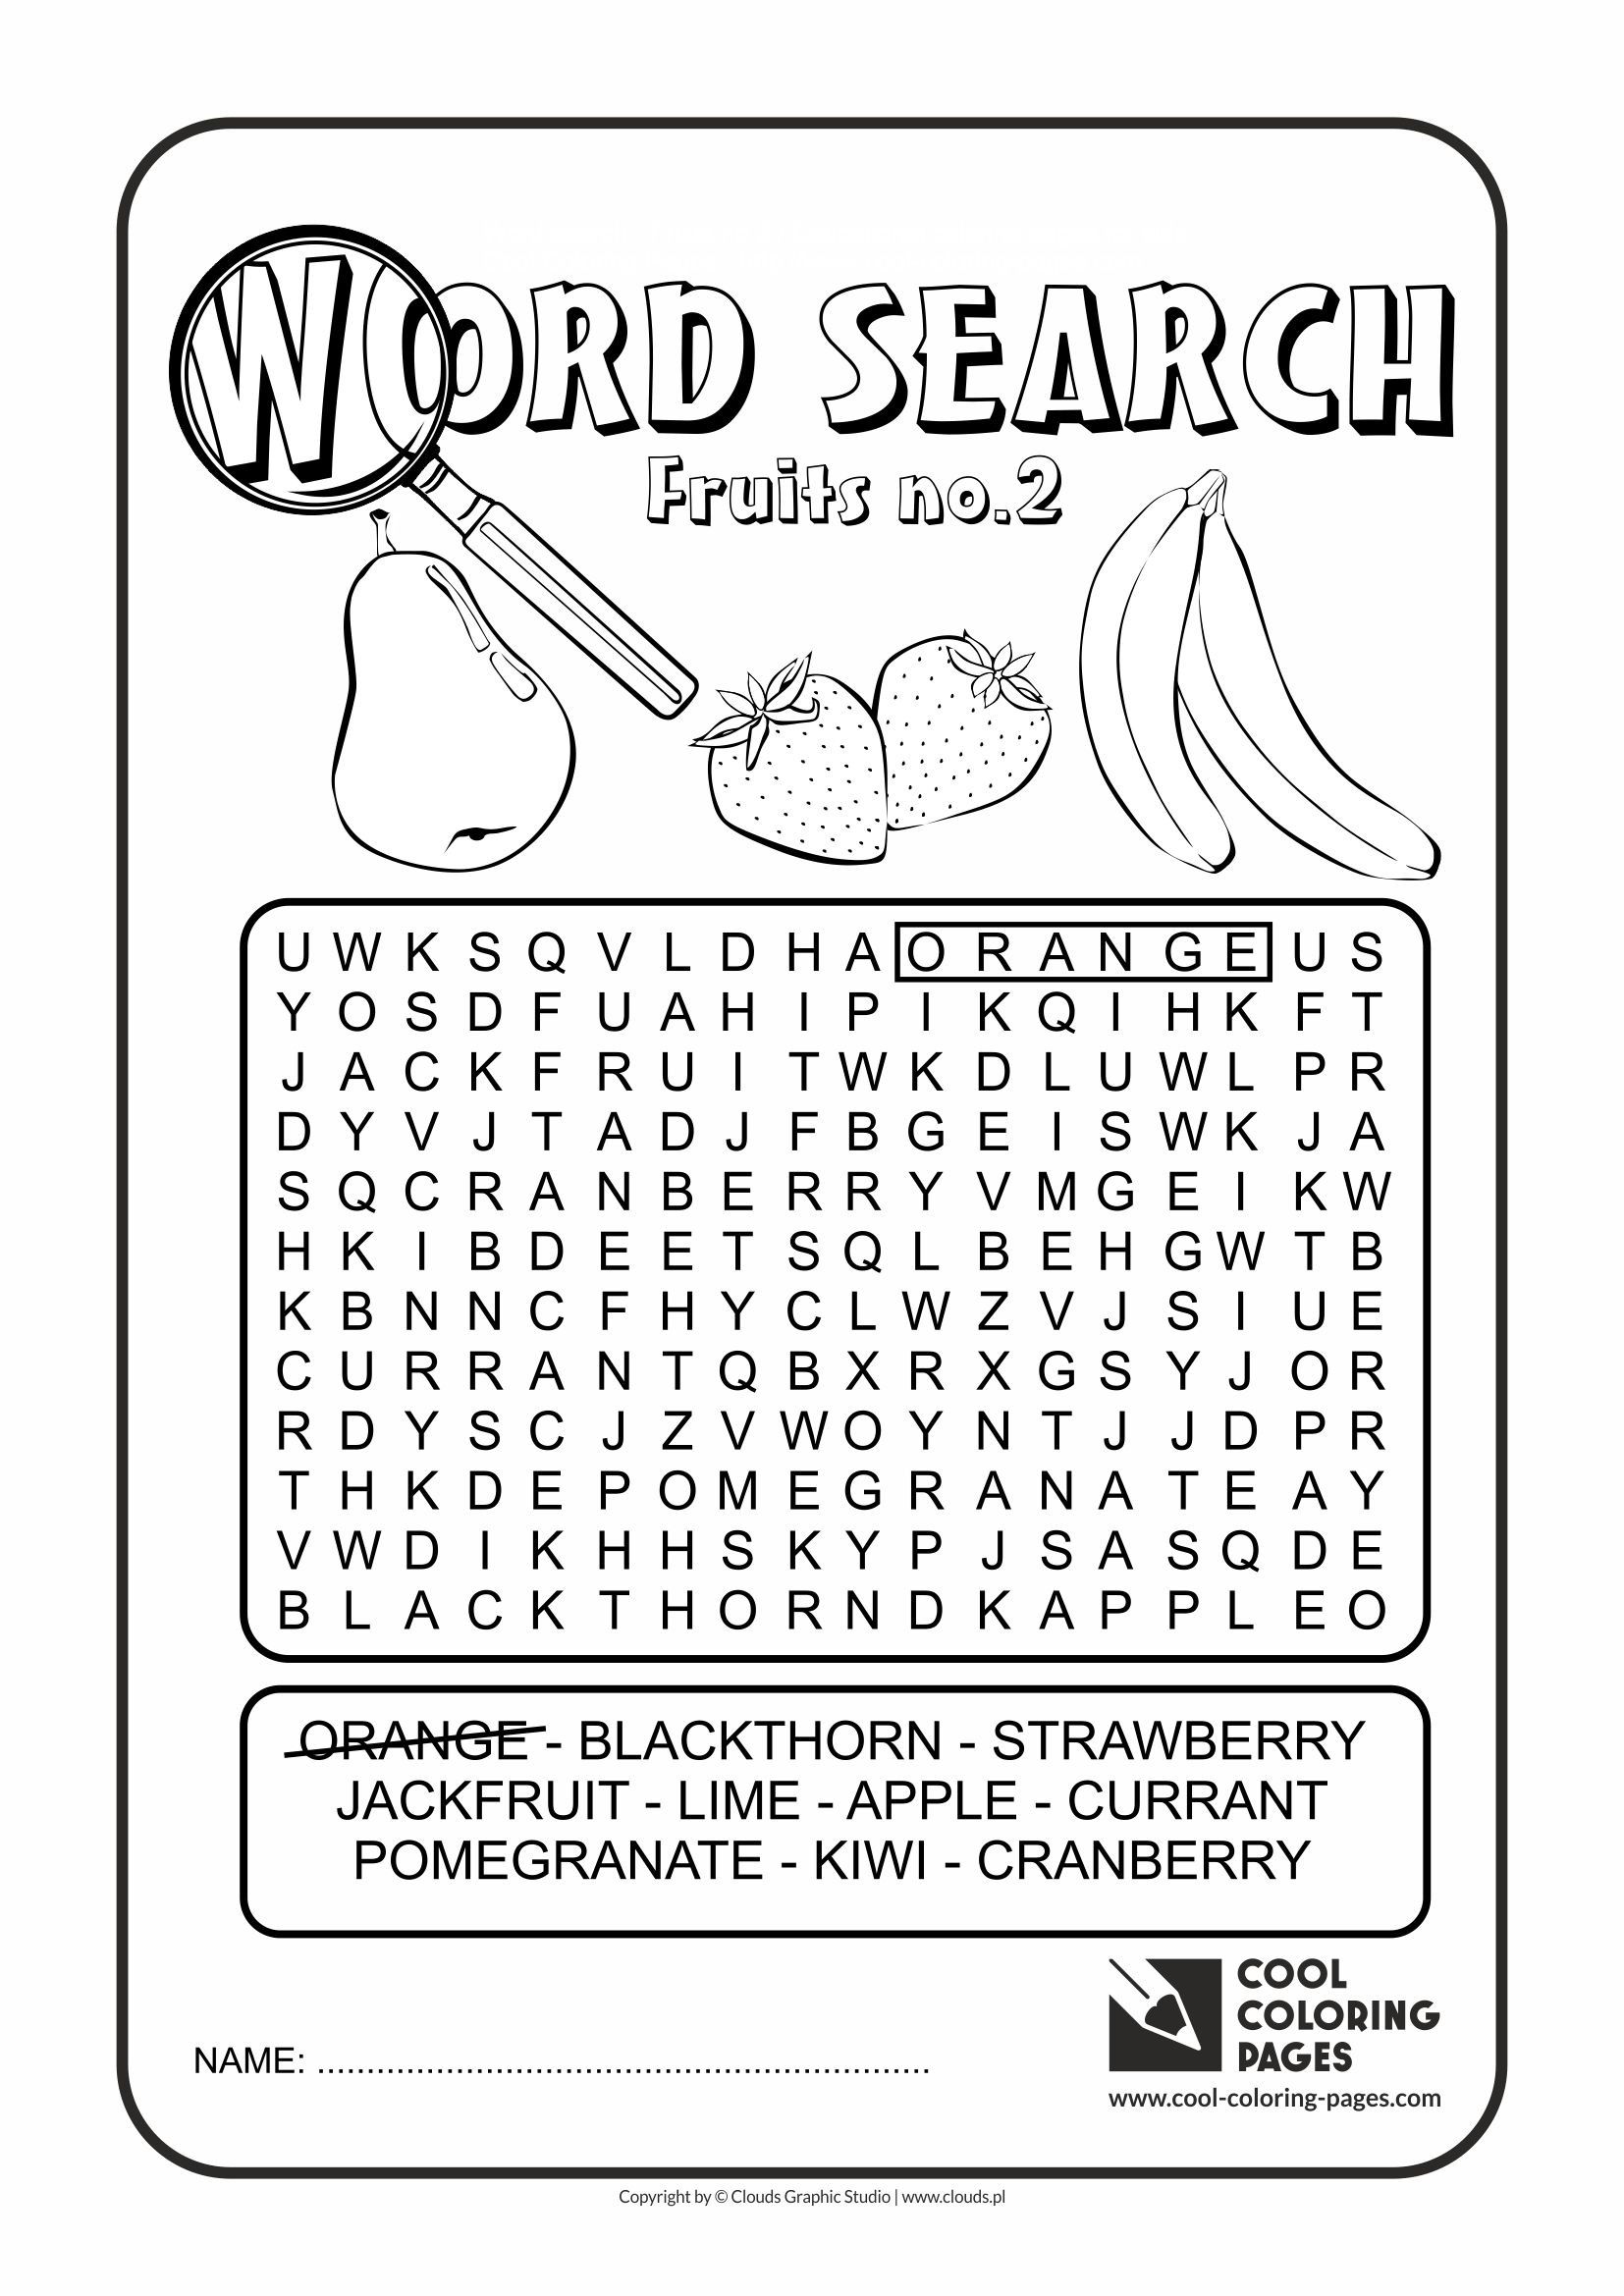 Word Search Coloring Pages To Print Cool Coloring Pages Word Search Cool Coloring Pages Free